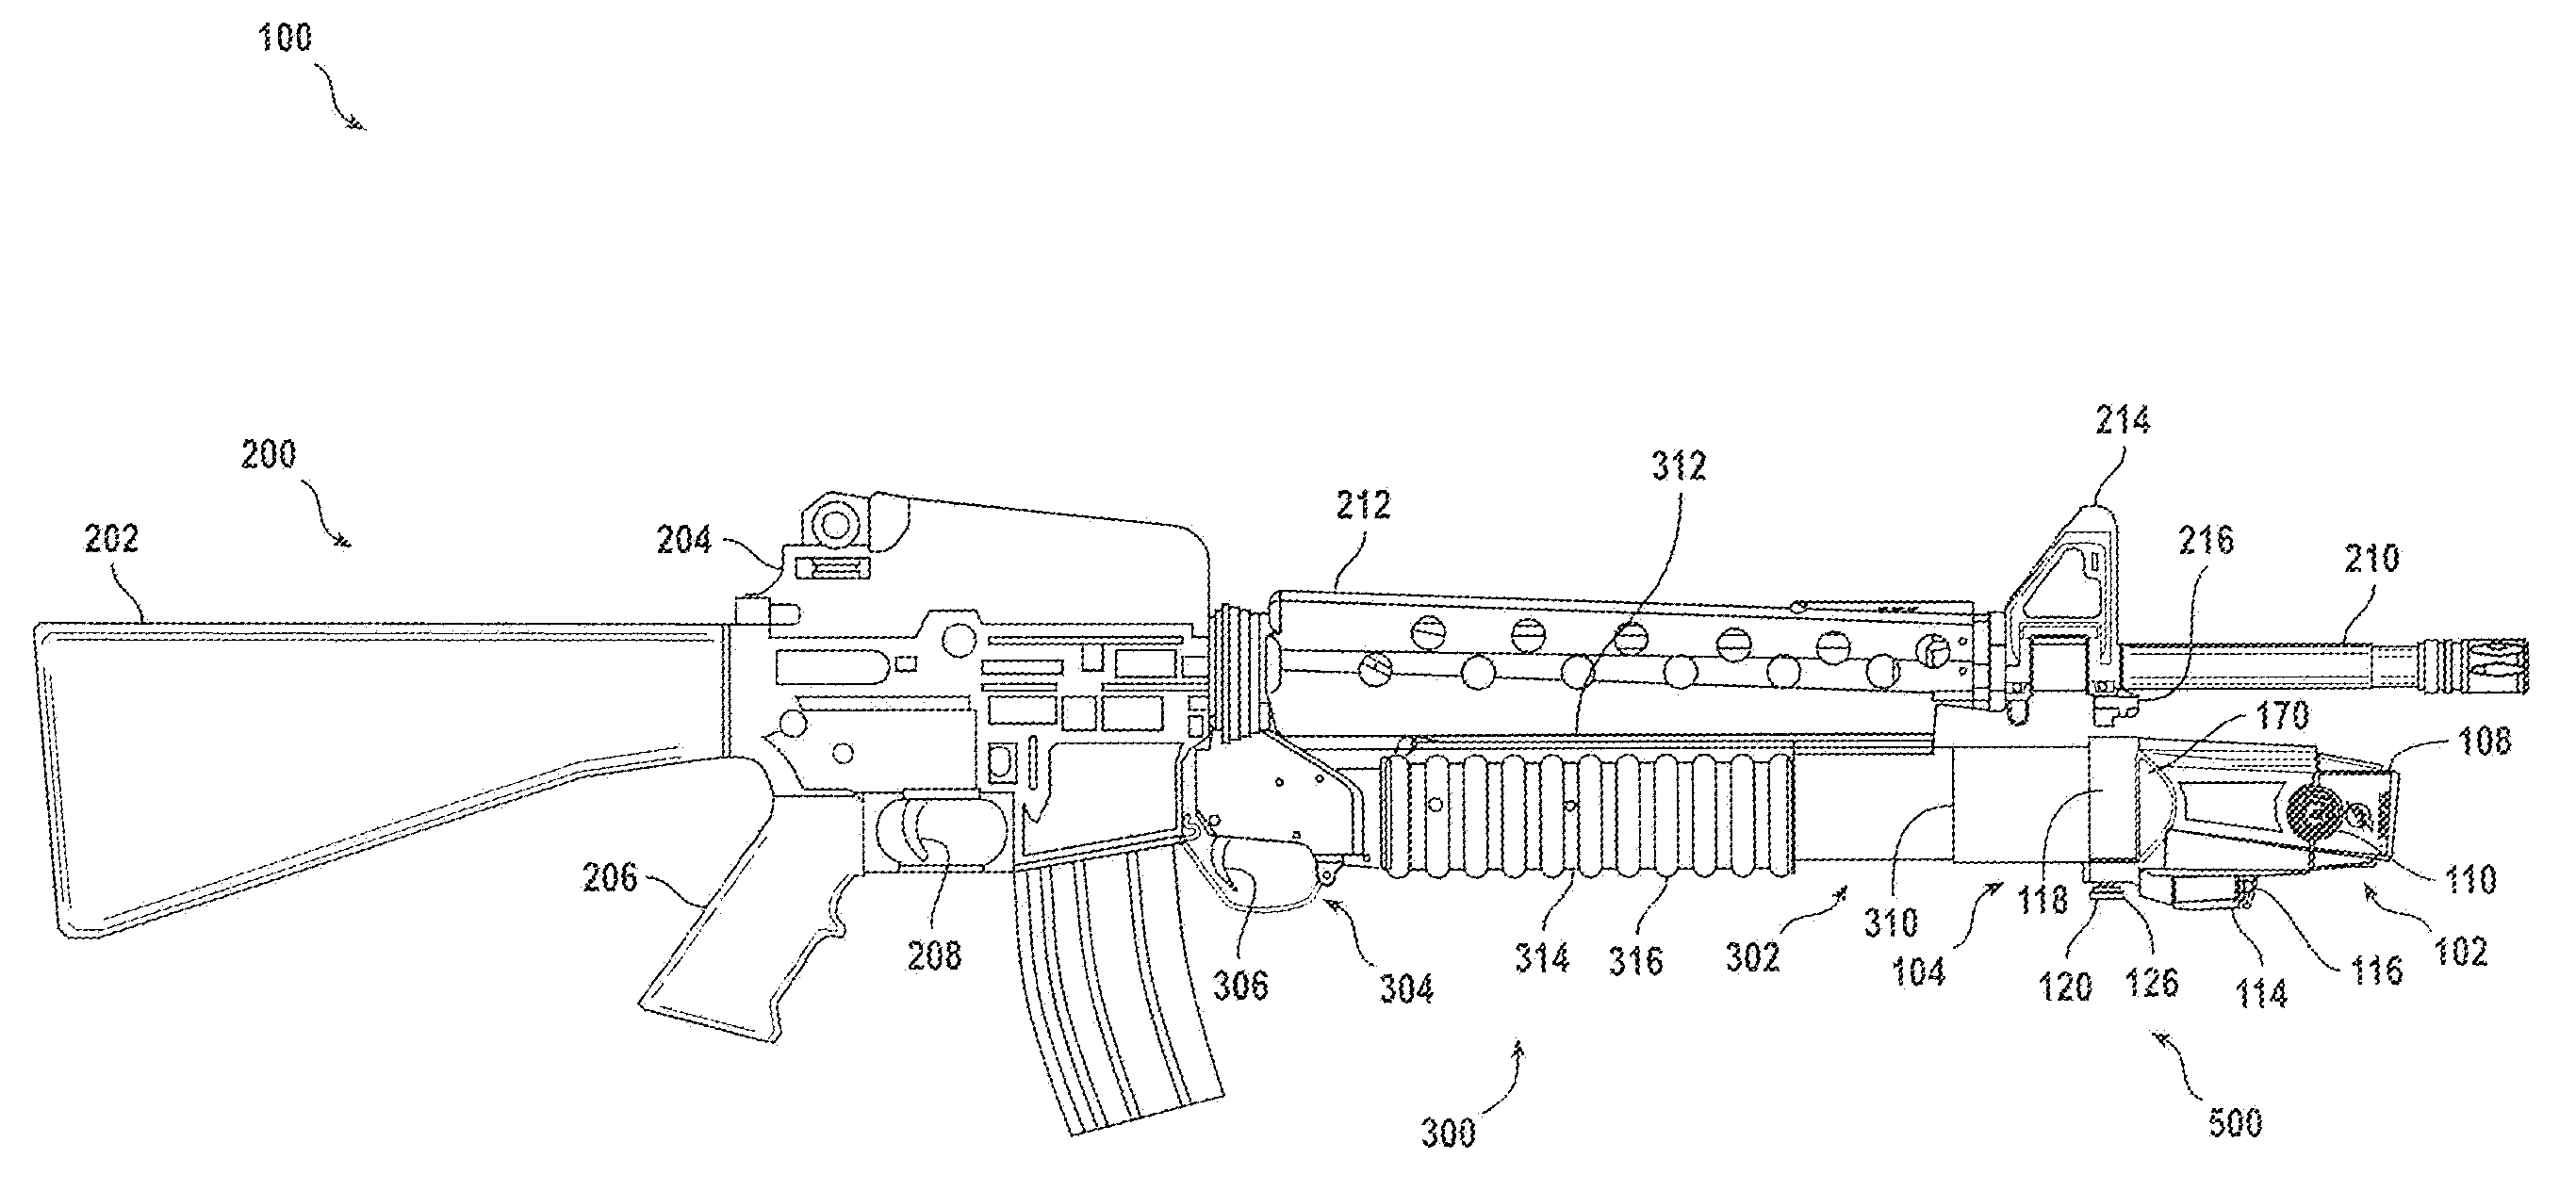 Systems and methods having a power supply in place of a round of ammunition